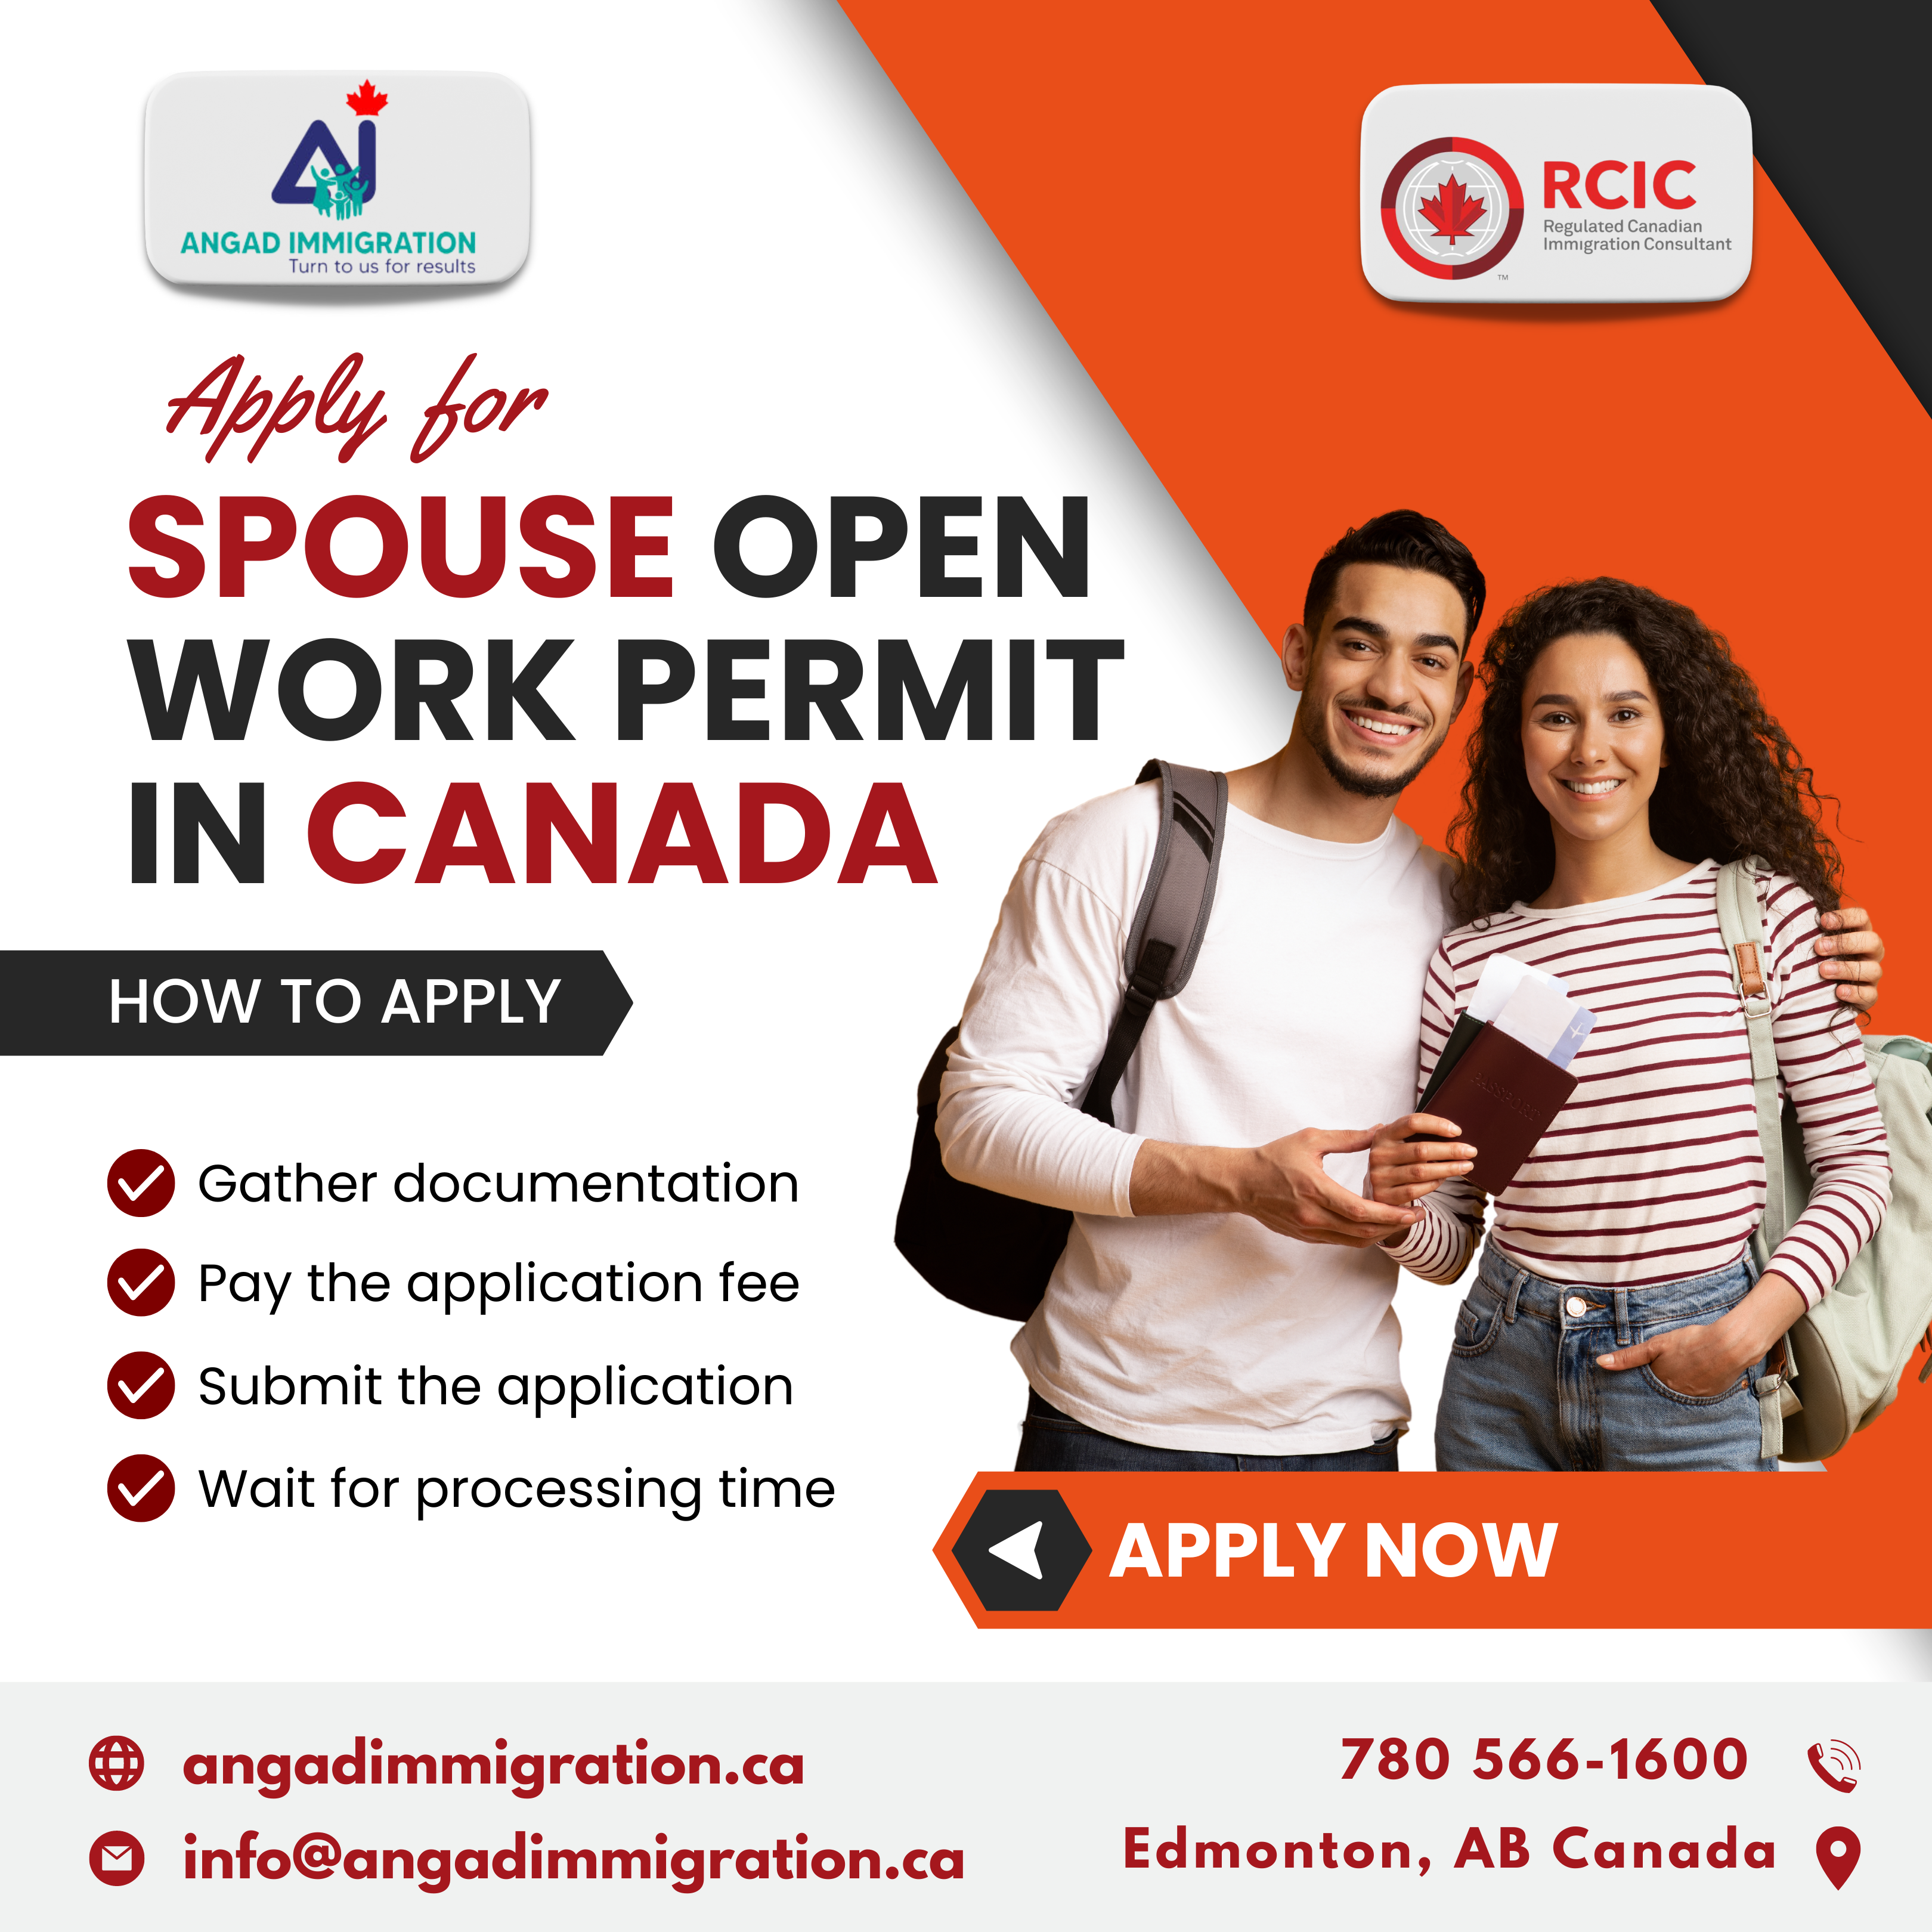 How to Apply for a Spousal Open Work Permit in Canada?